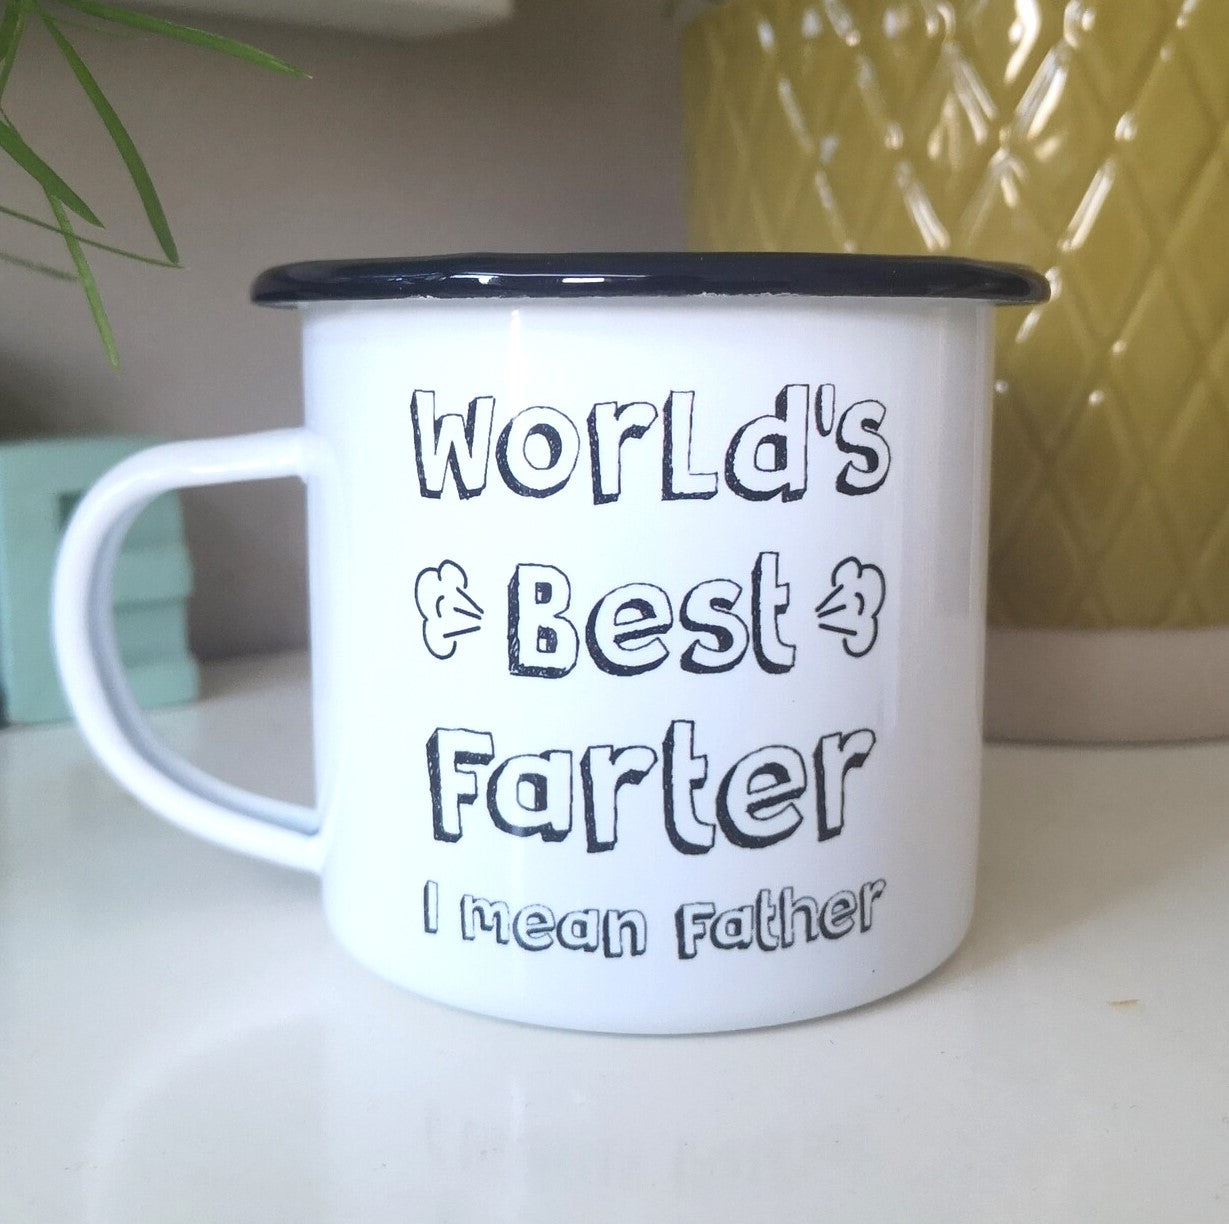 A White enamel mug with a black rim with the following on the front - World's Best Farter, I mean Father